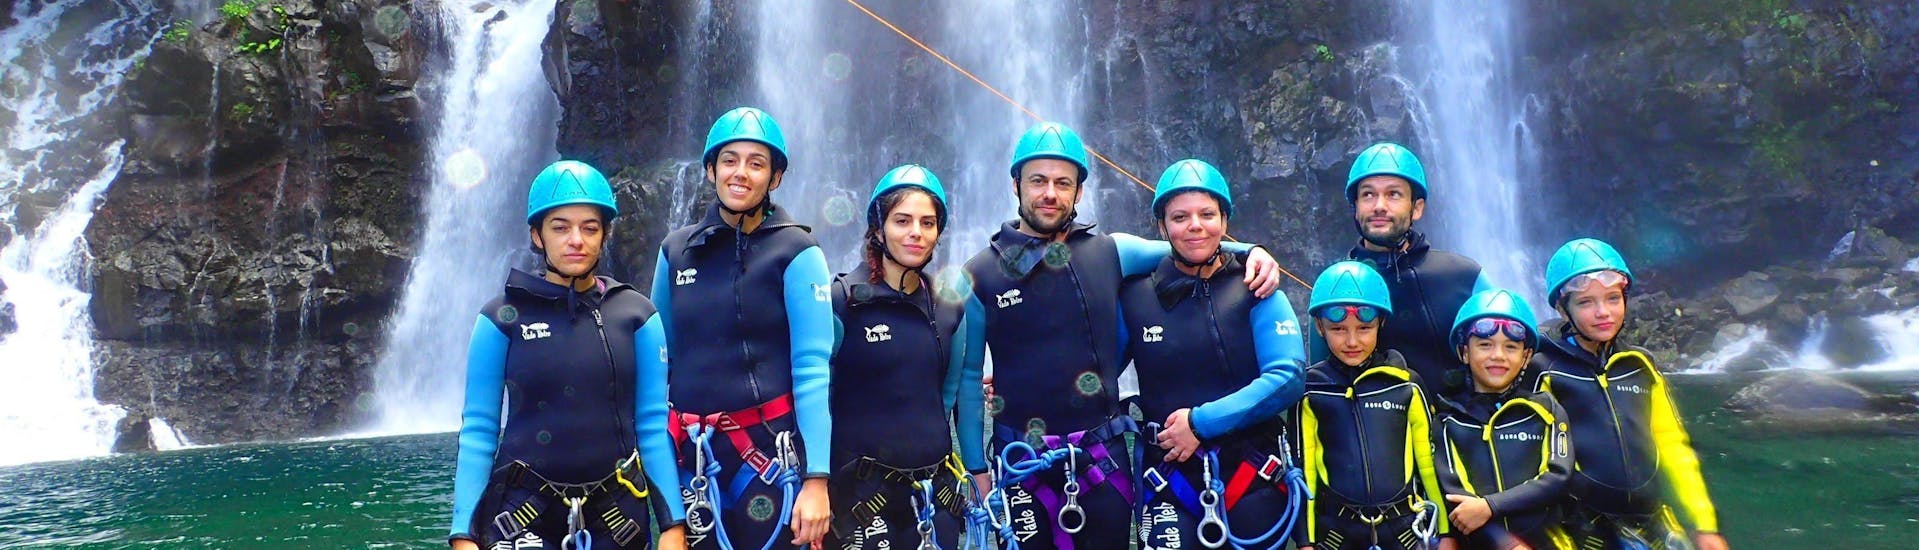 Sportliche Canyoning-Tour in Saint Joseph (Langevin) - Canyon du Grand Galet.